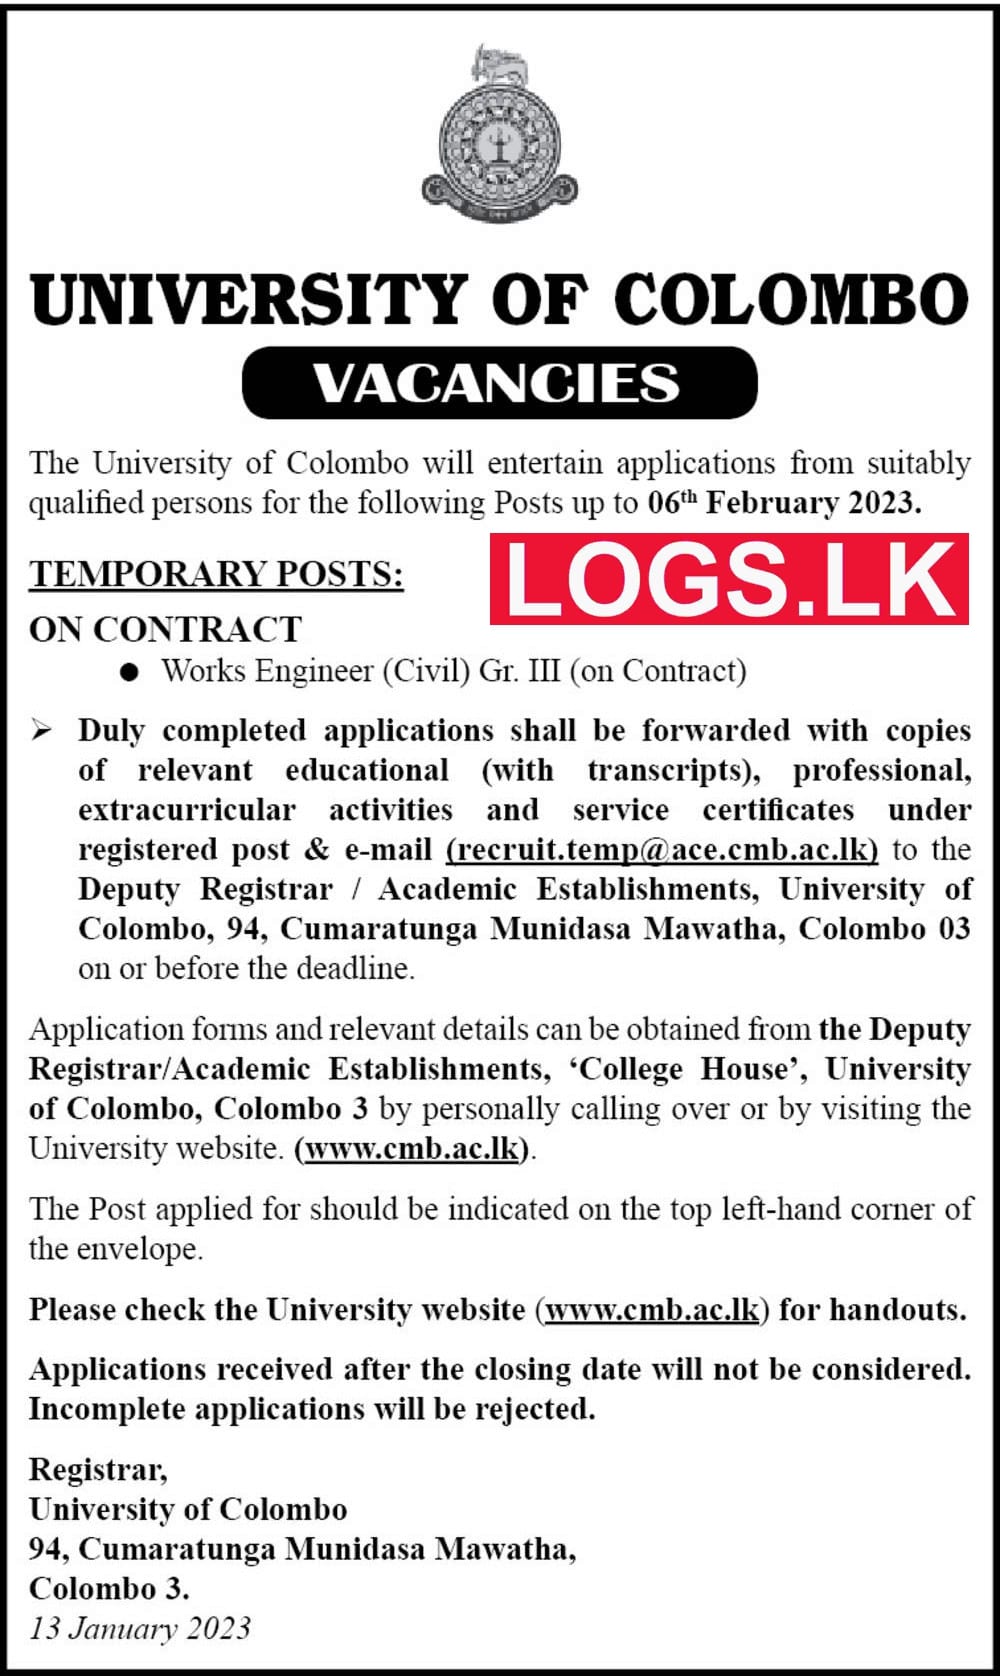 University of Colombo Temporary Vacancies 2023 Application Form, Details Download